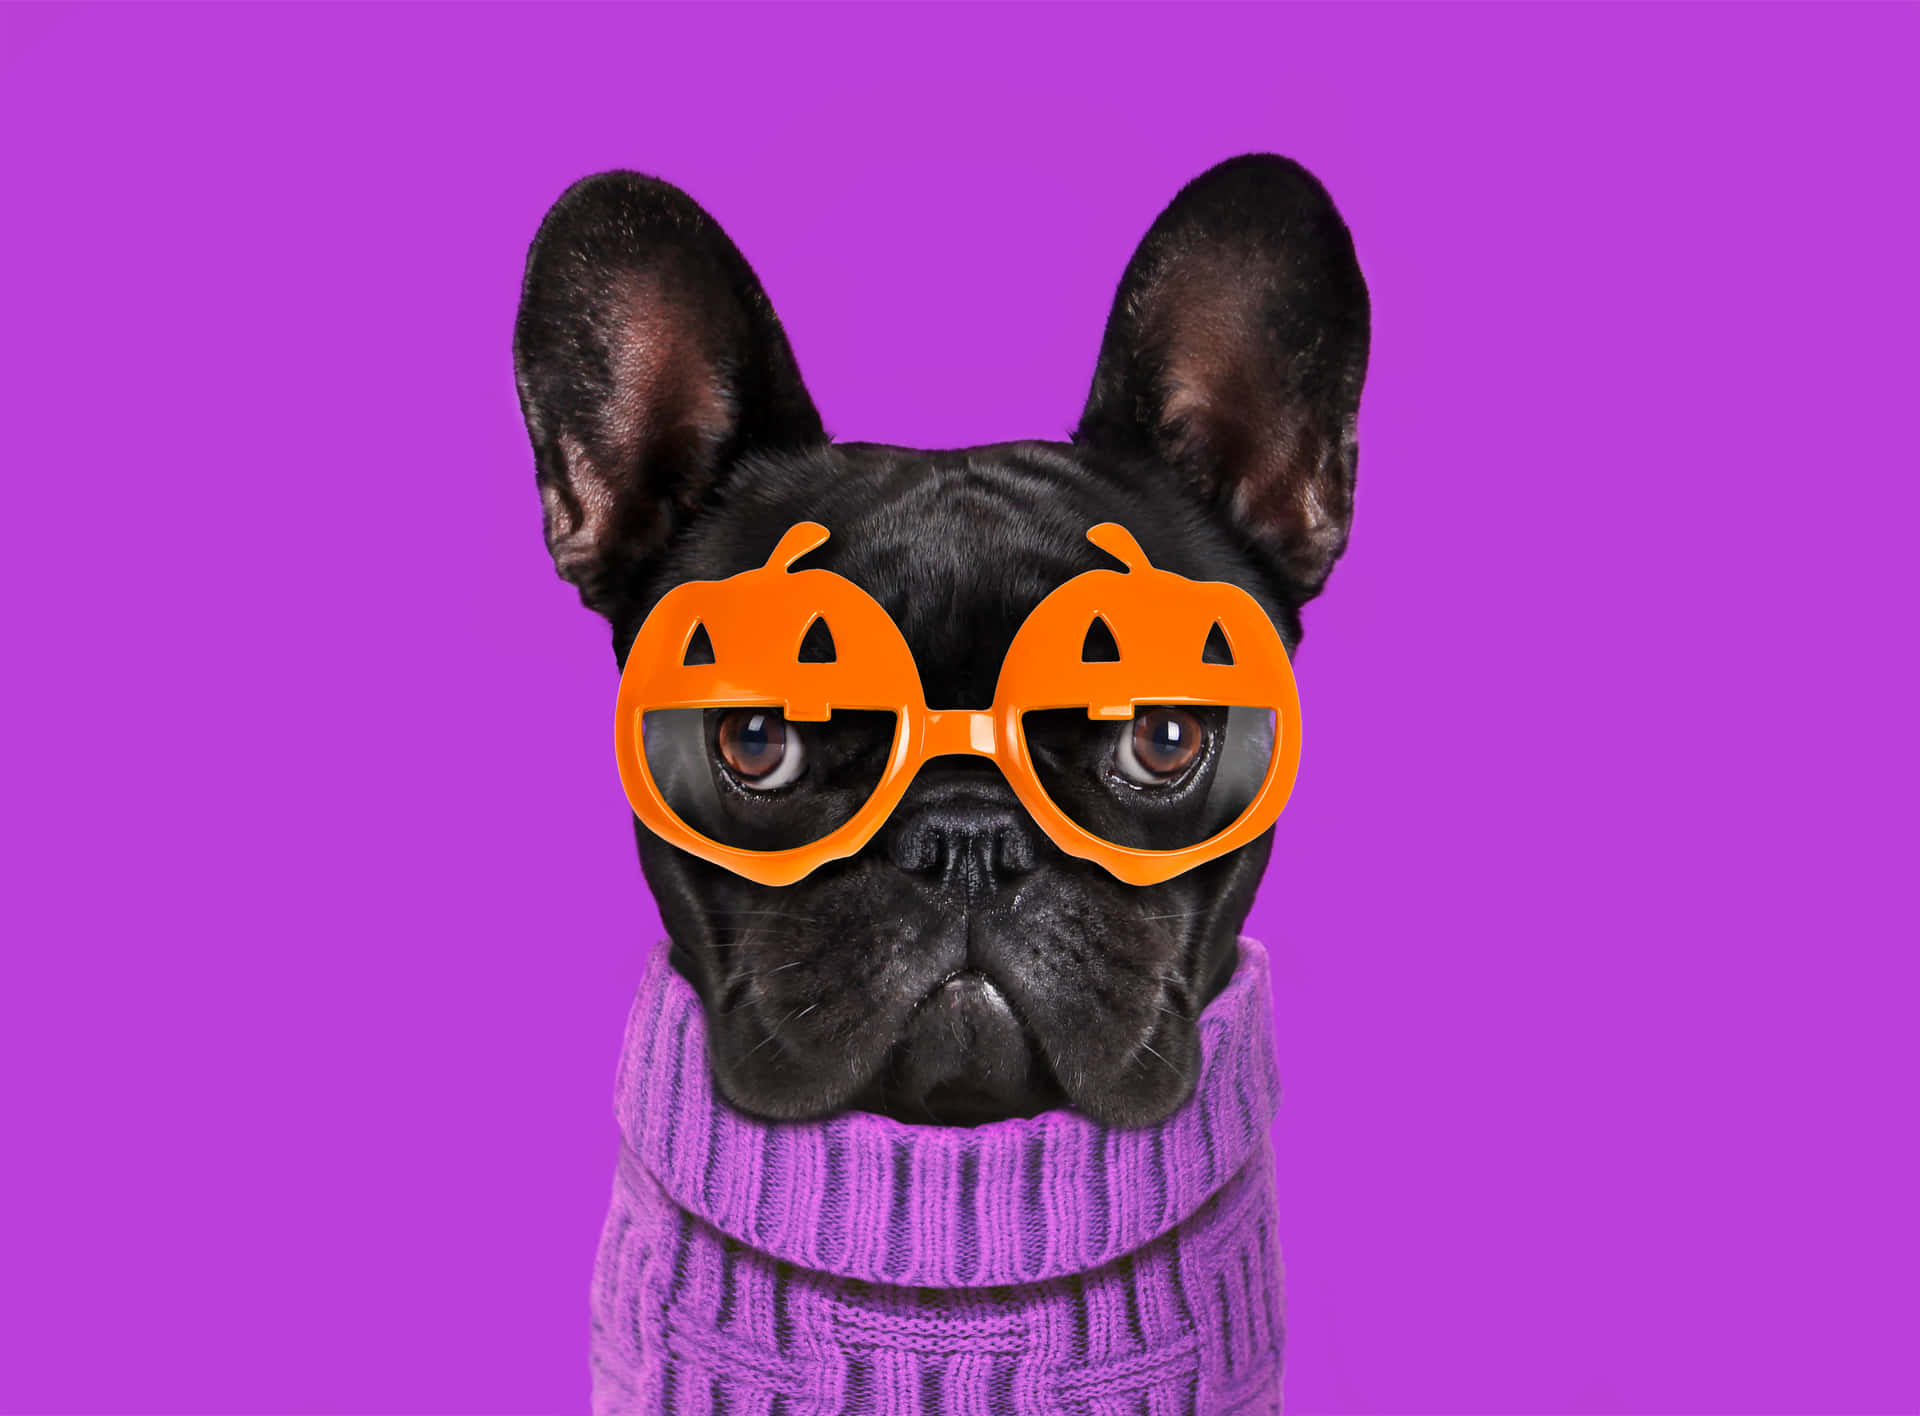 "Your beloved pet looks spook-tacular in a Halloween costume!" Wallpaper